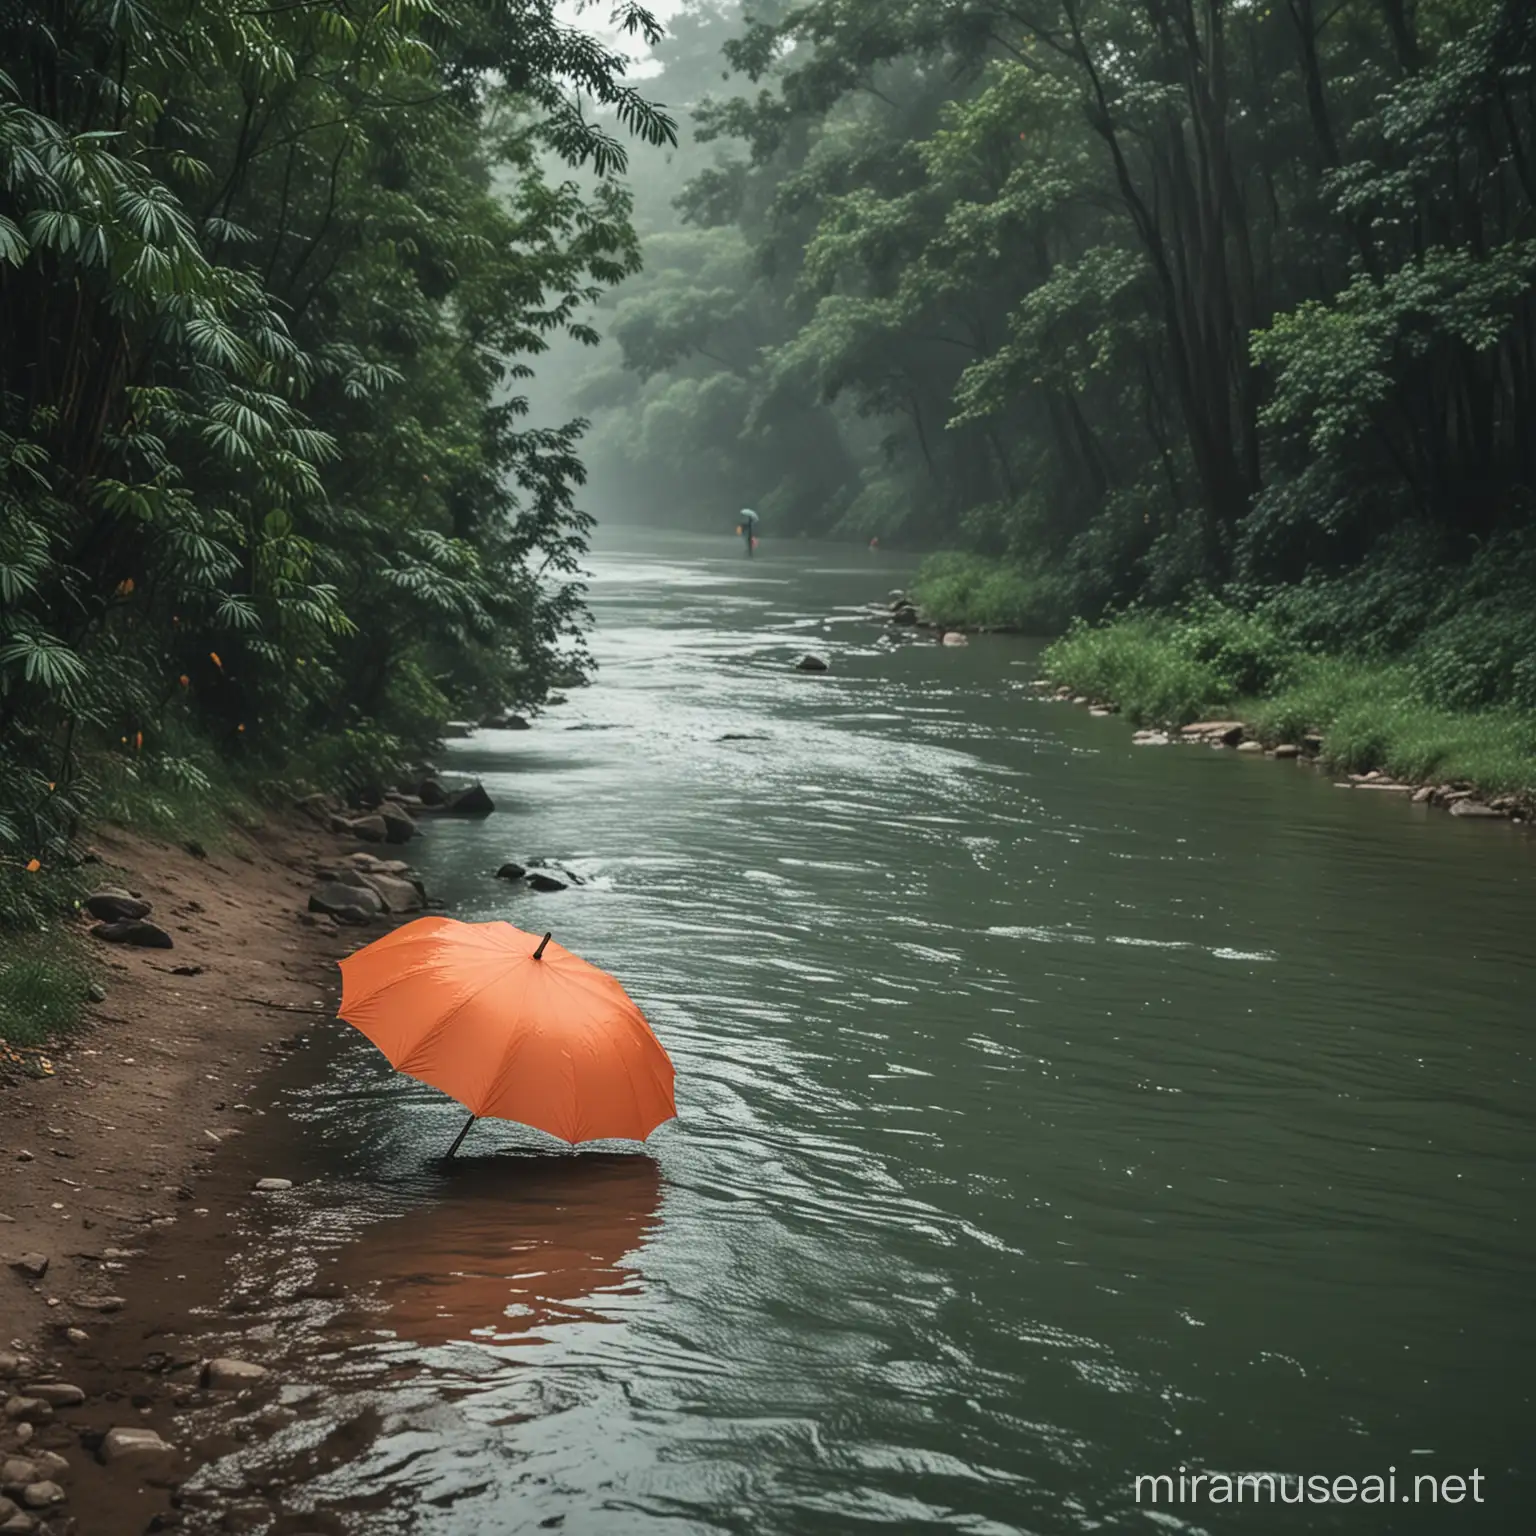 water river and umbrella in 1 frame